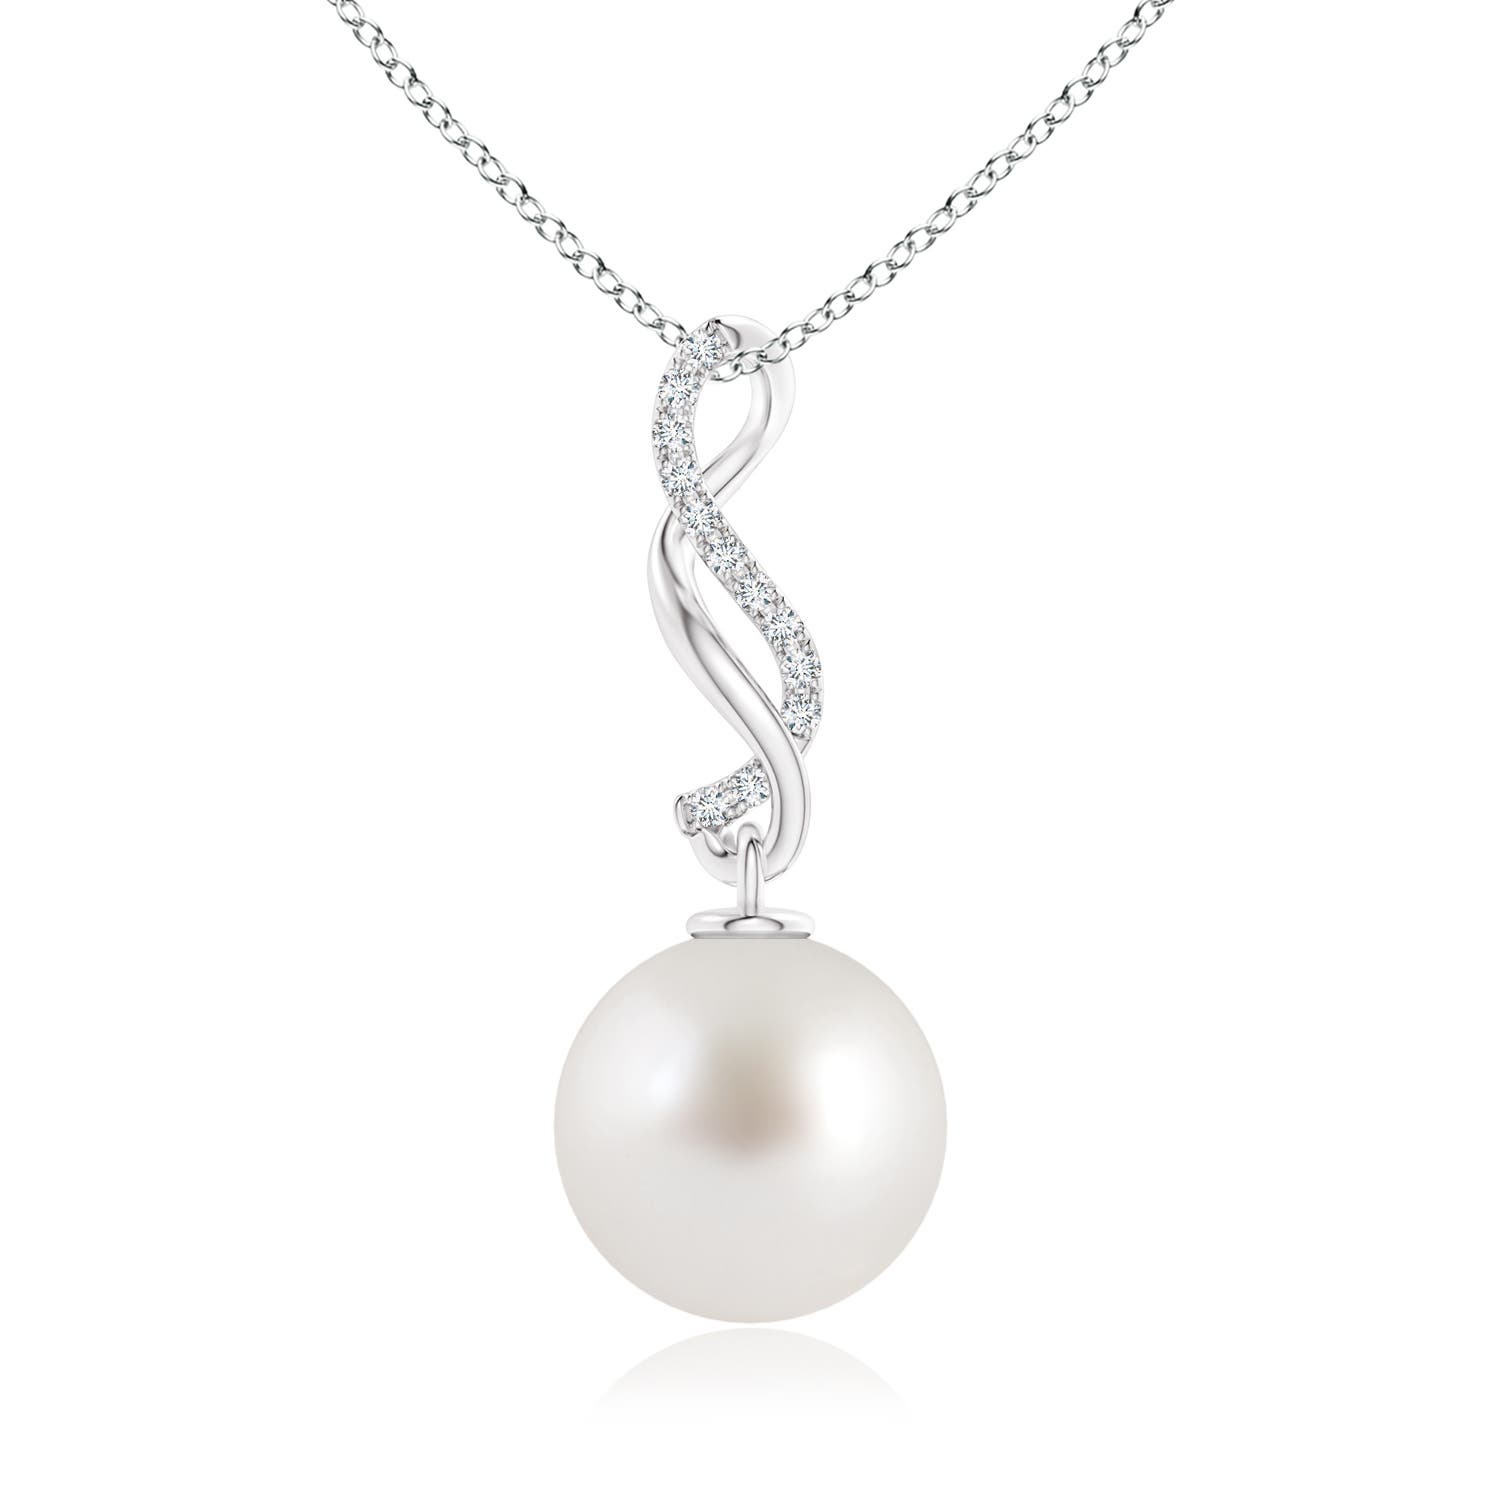 AAA - South Sea Cultured Pearl / 7.26 CT / 14 KT White Gold